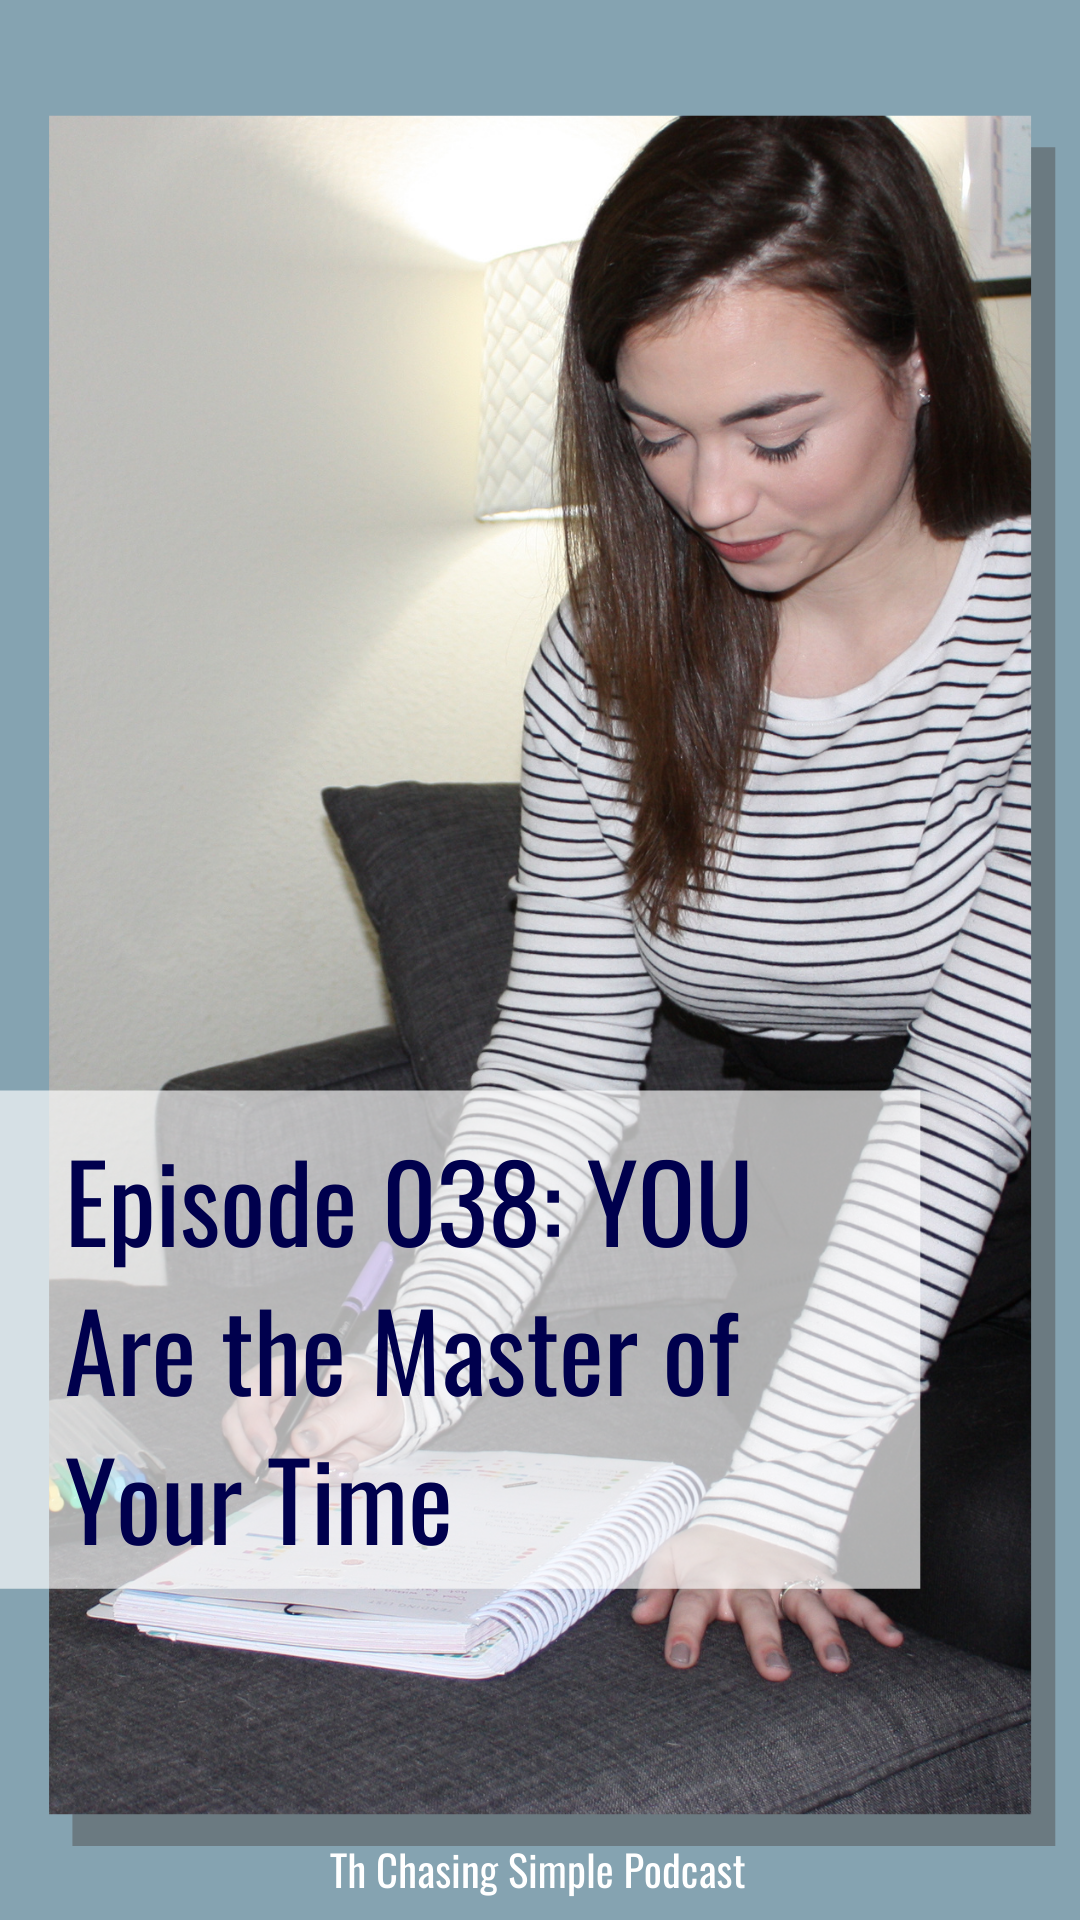 You are the master of your time. Your time does not run you, and if you feel like it is, tune in to hear how you can take back your time.